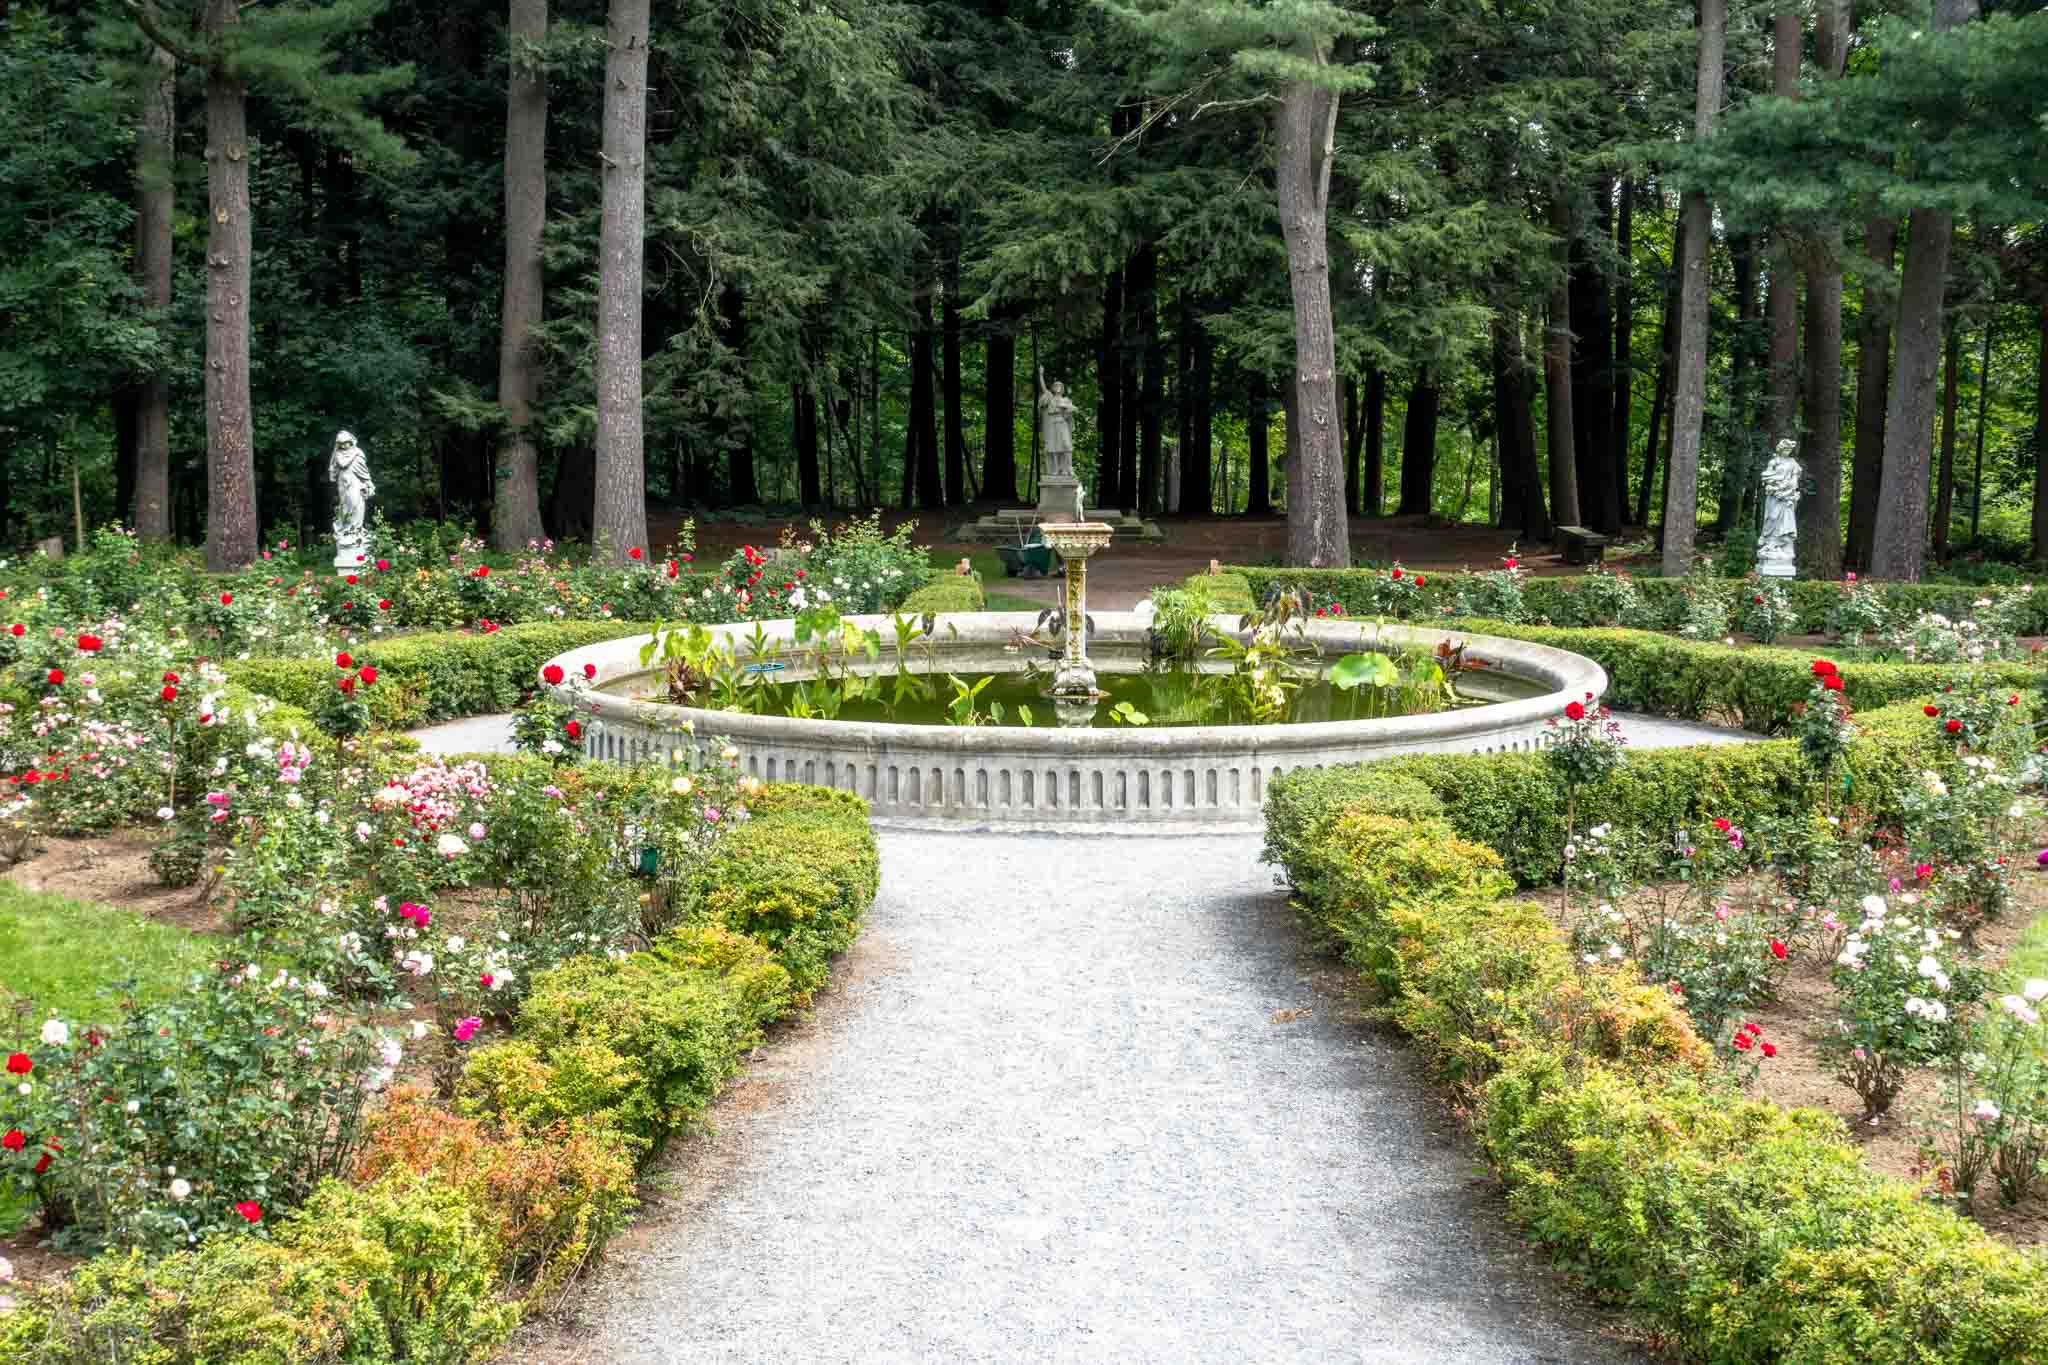 Yaddo Gardens is a beautiful outdoor spot in Saratoga Springs